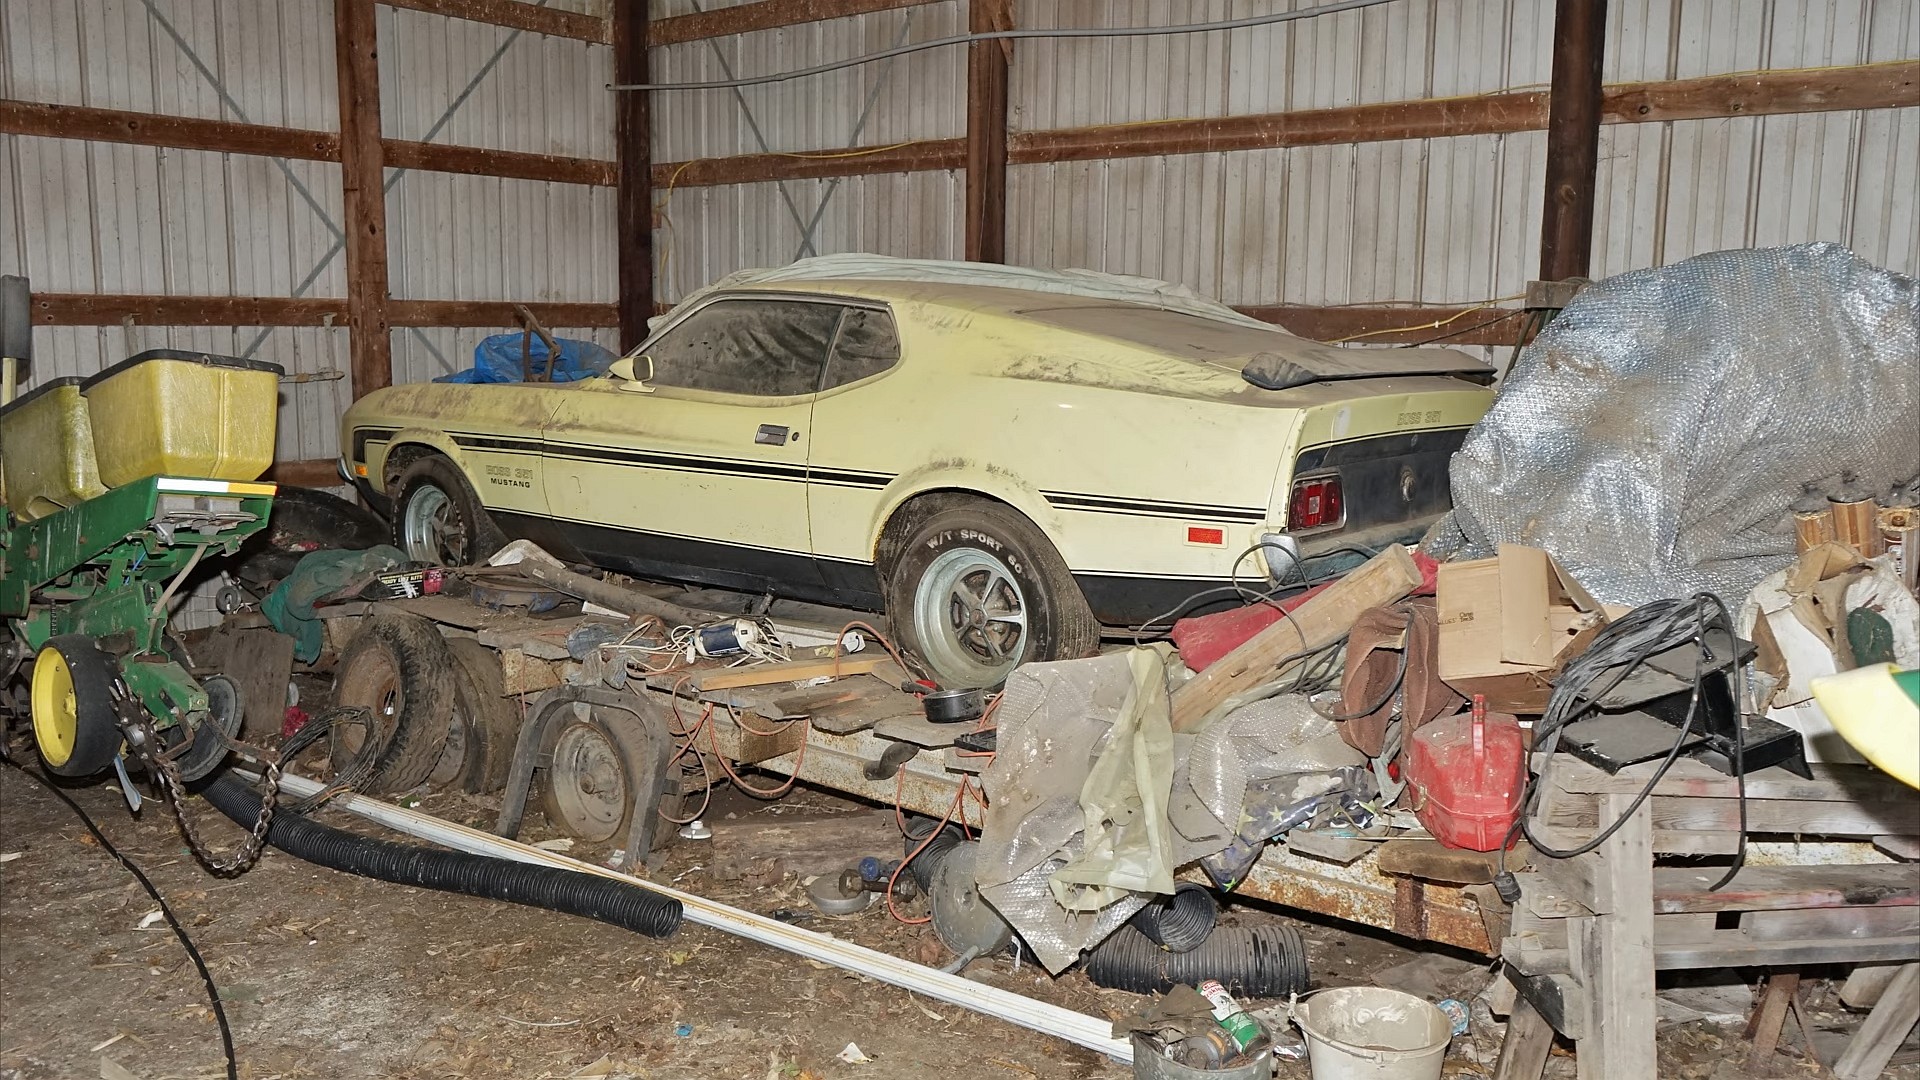 1971 ford mustang boss 351 that spent 46 years in a barn is a rat infested survivor 7